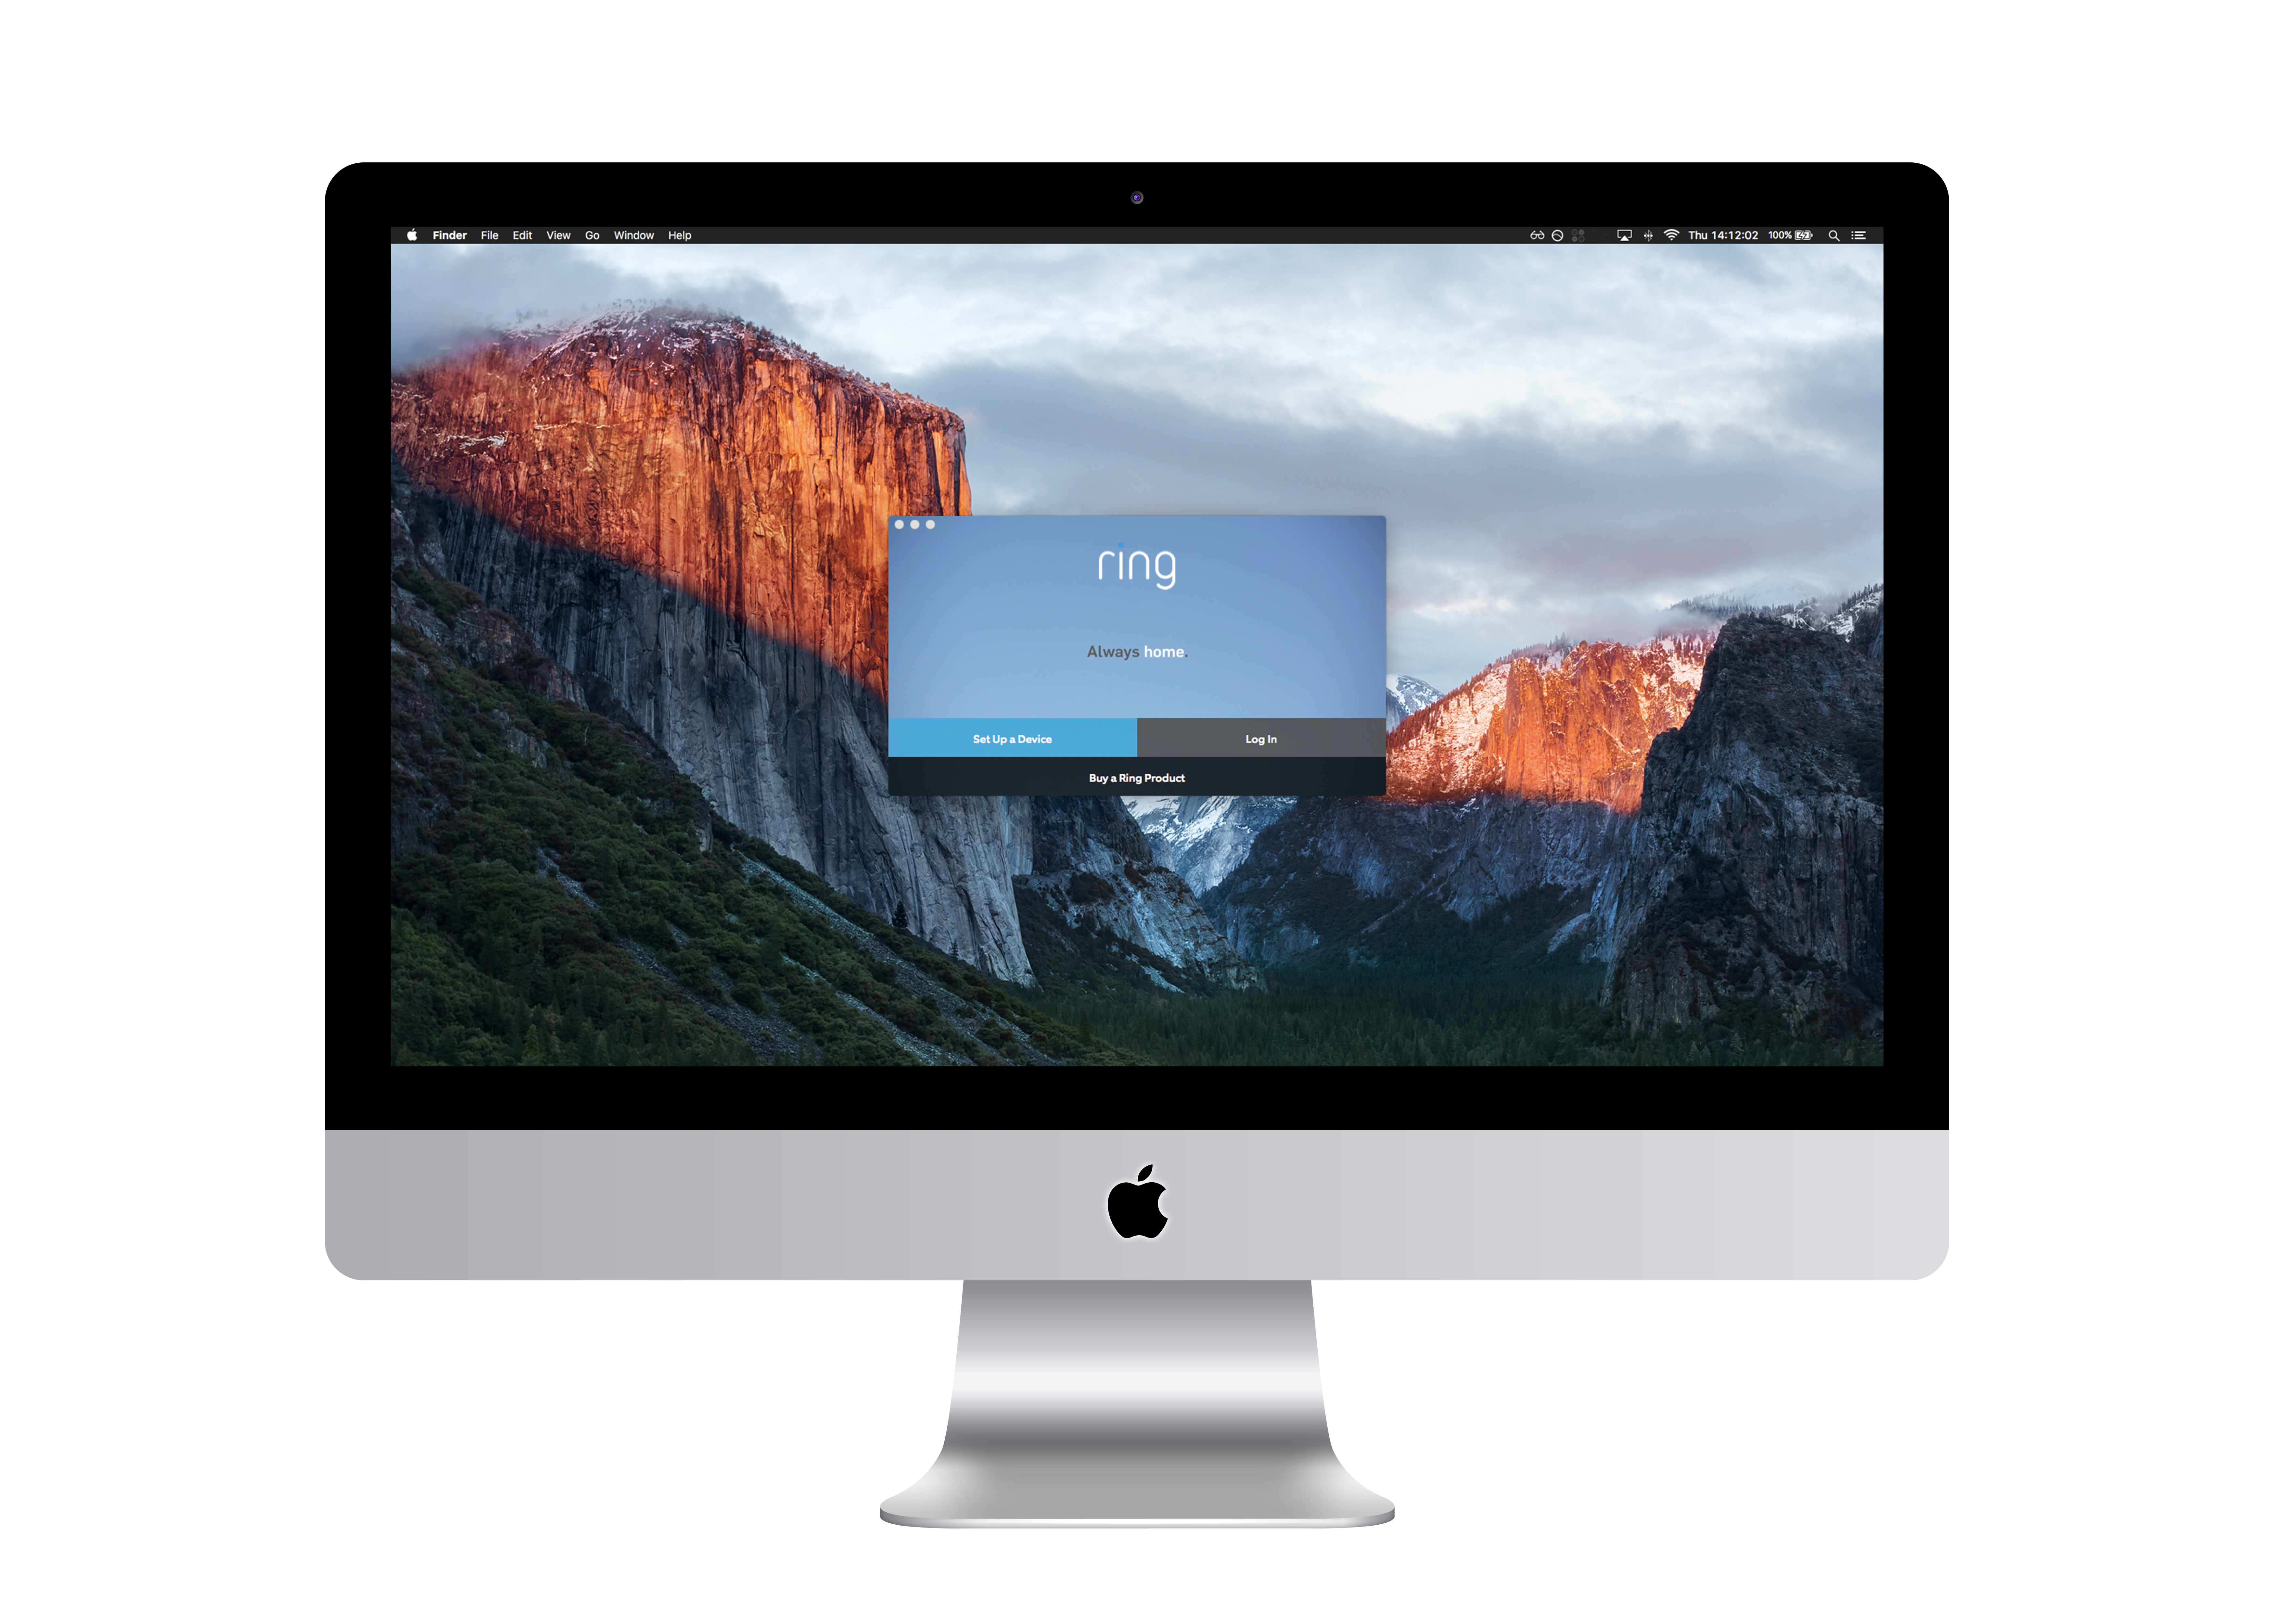 Monitor Your Home with the Ring Video Doorbell App for Mac